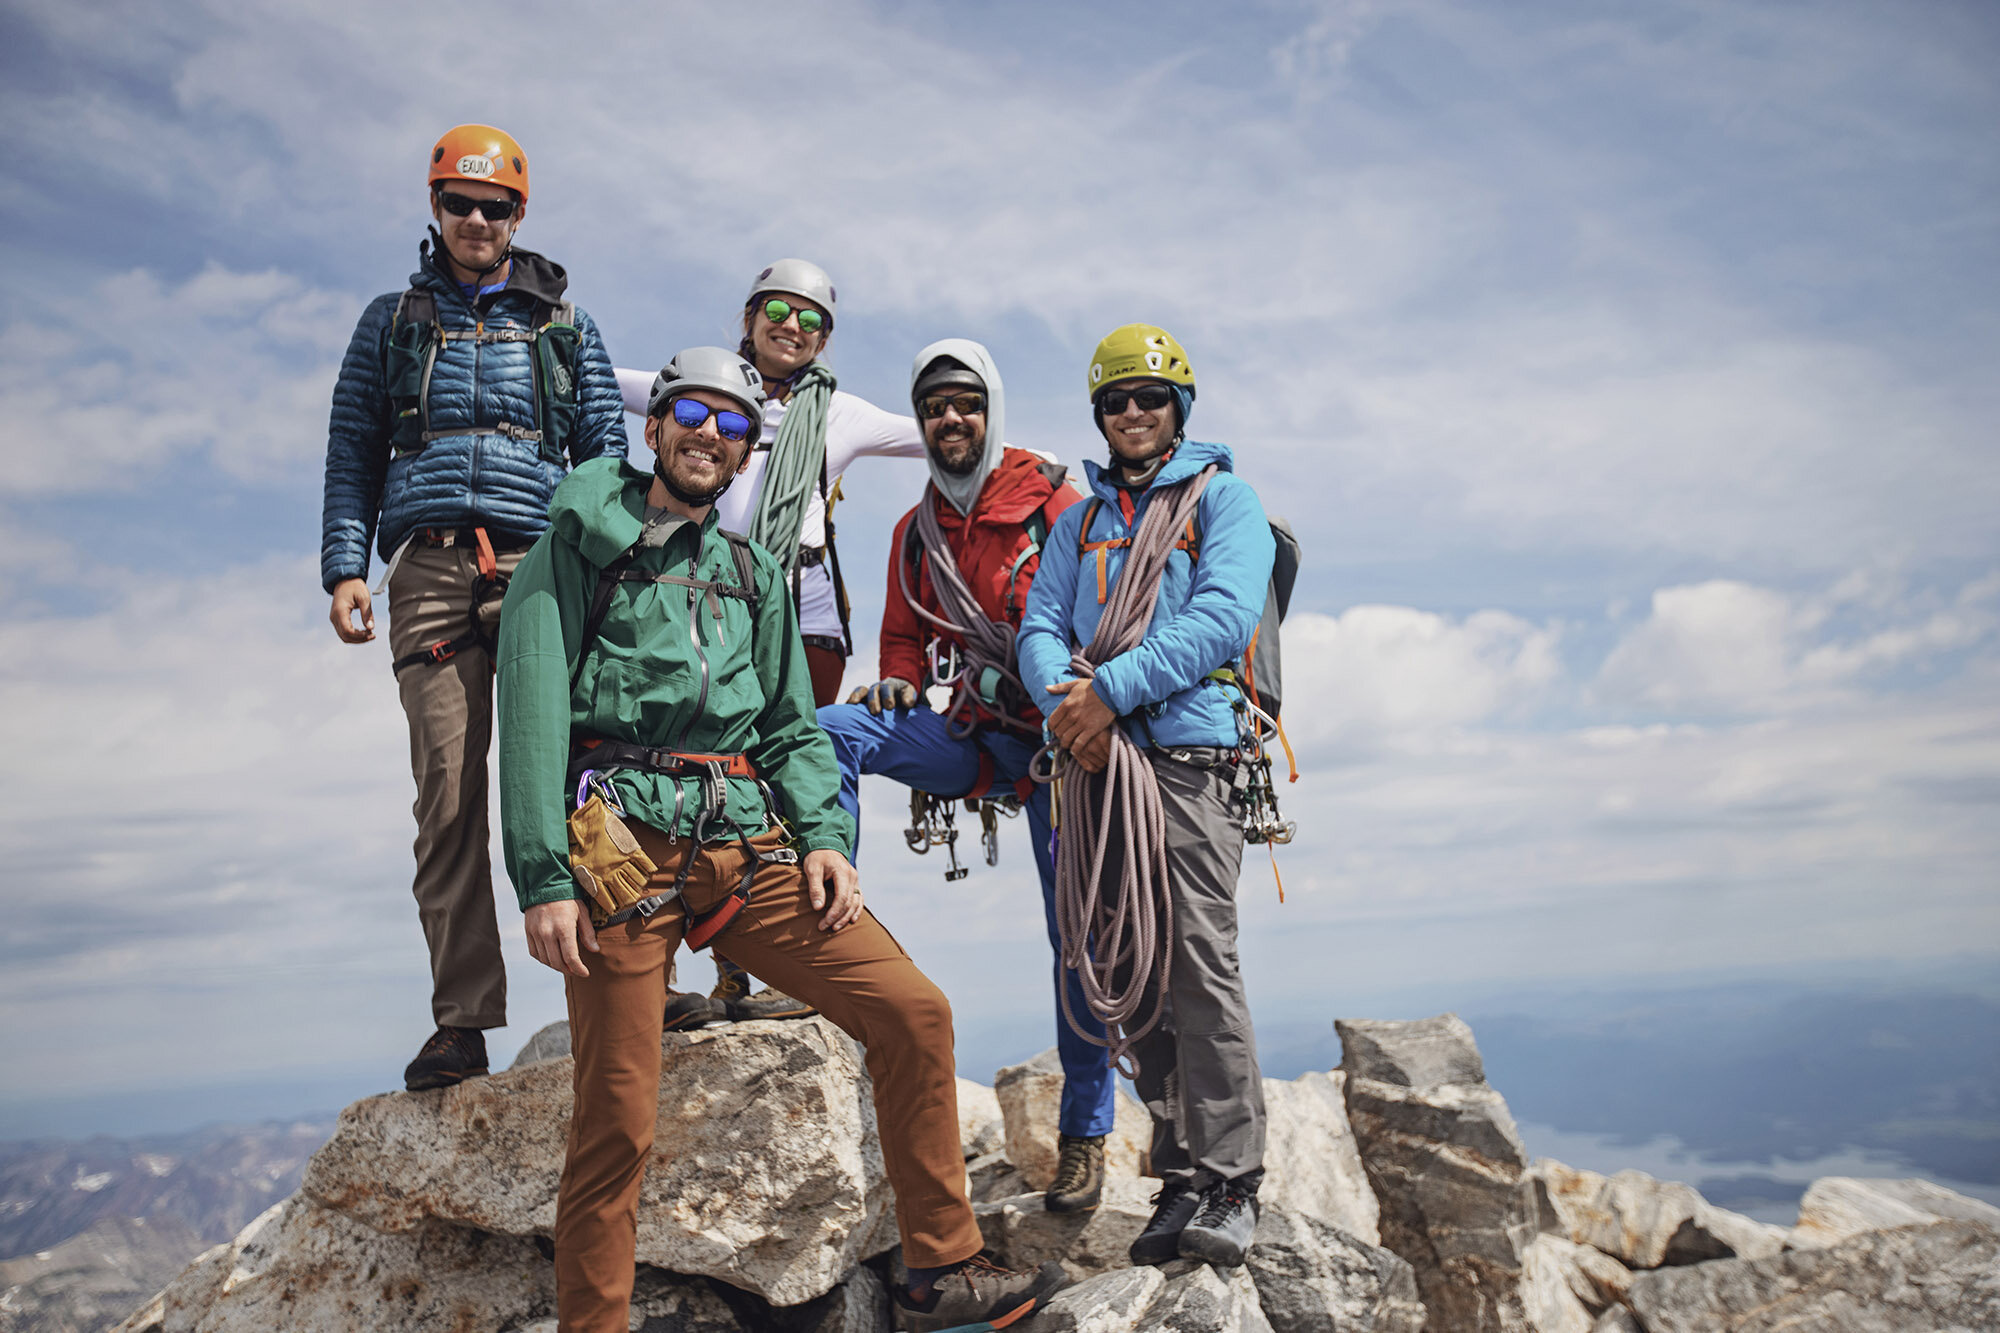  The team on the summit of the Grand Teton. 